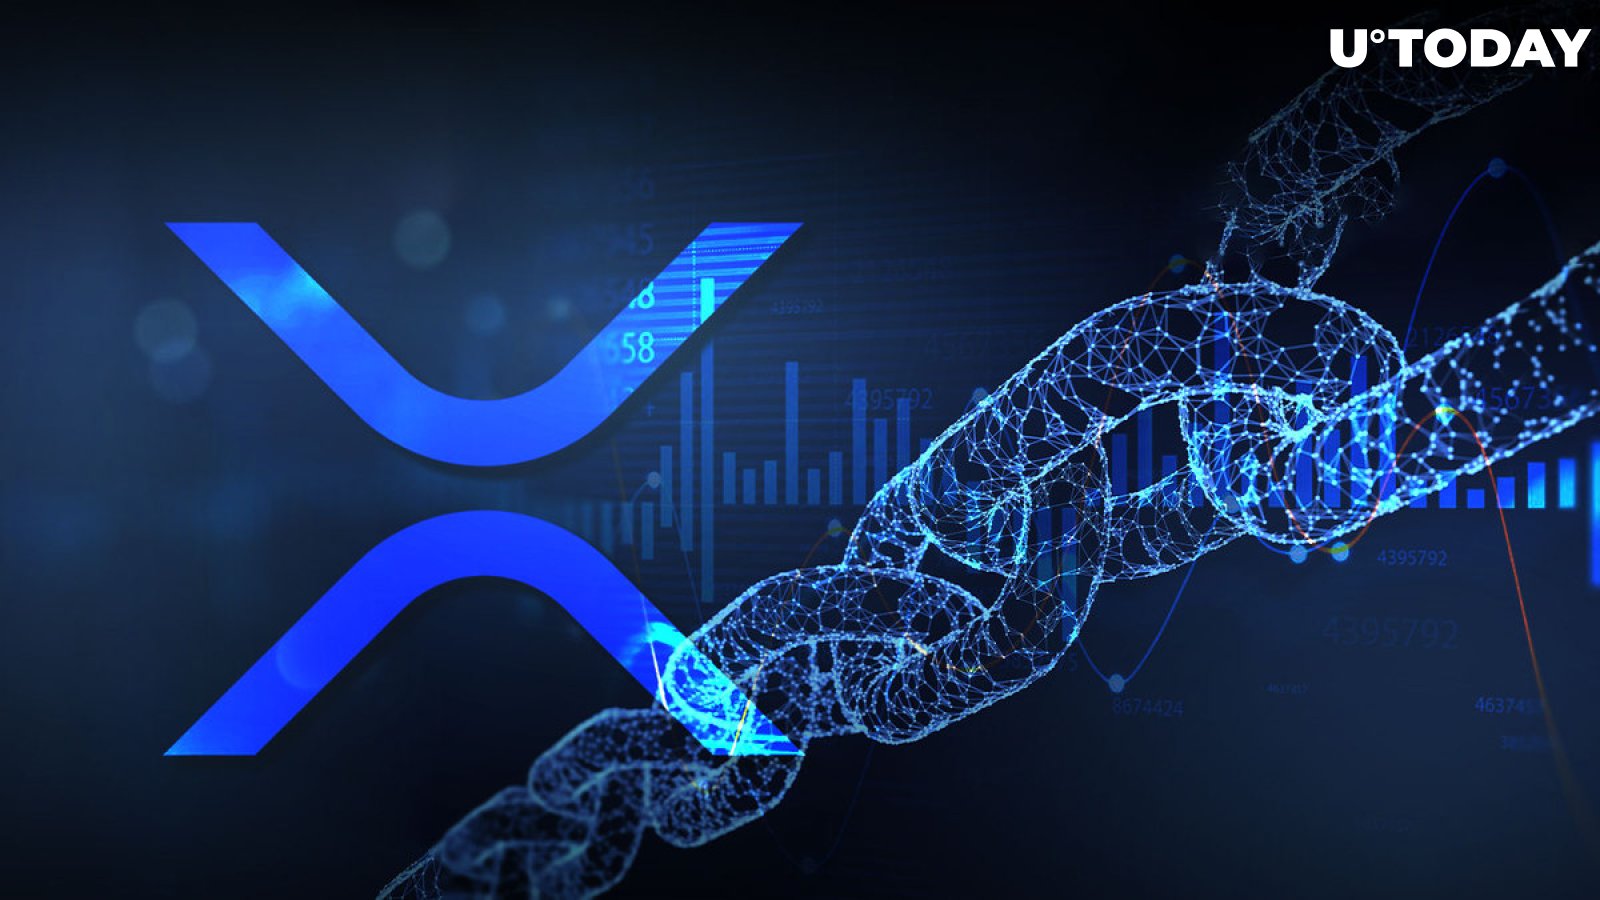 XRP Will Go Fully Cross-Chain, If This Proposal Passes